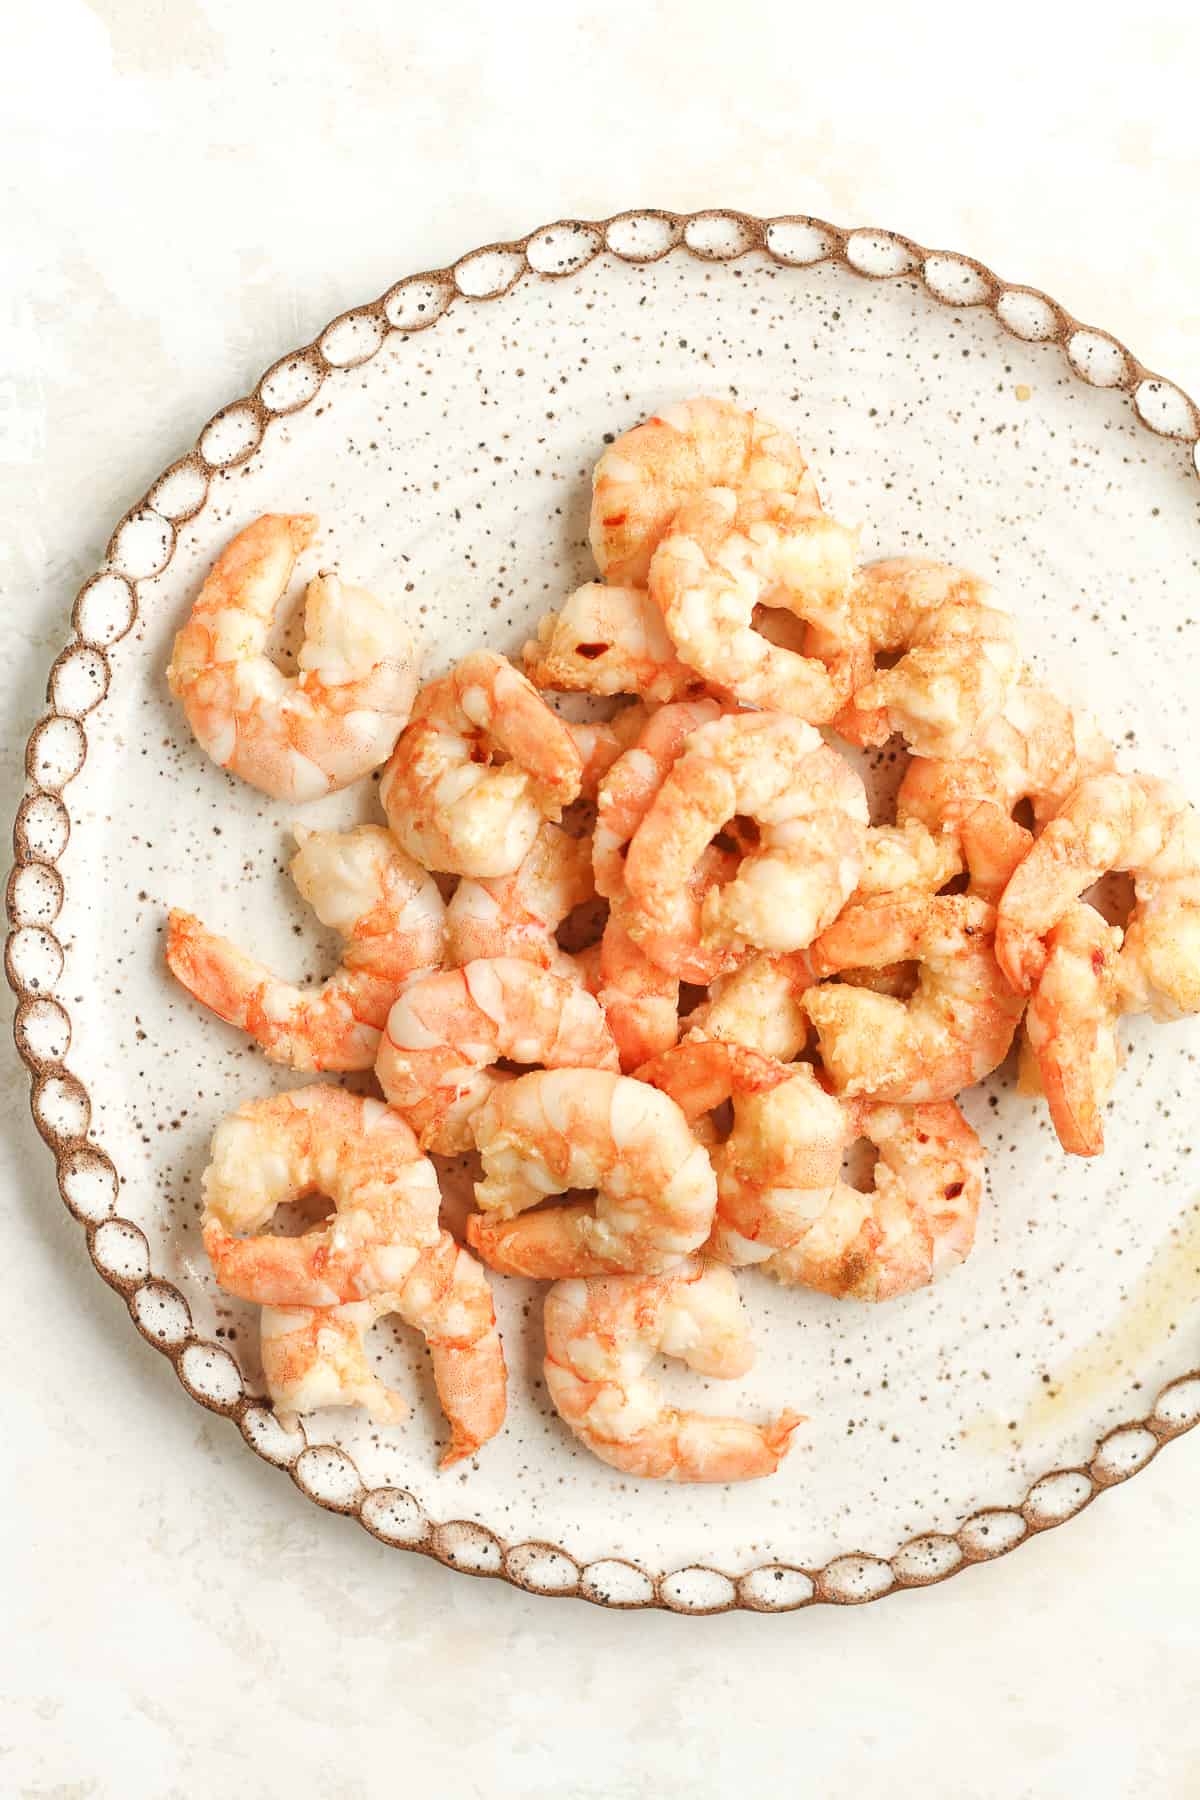 A plate of the grilled shrimp.